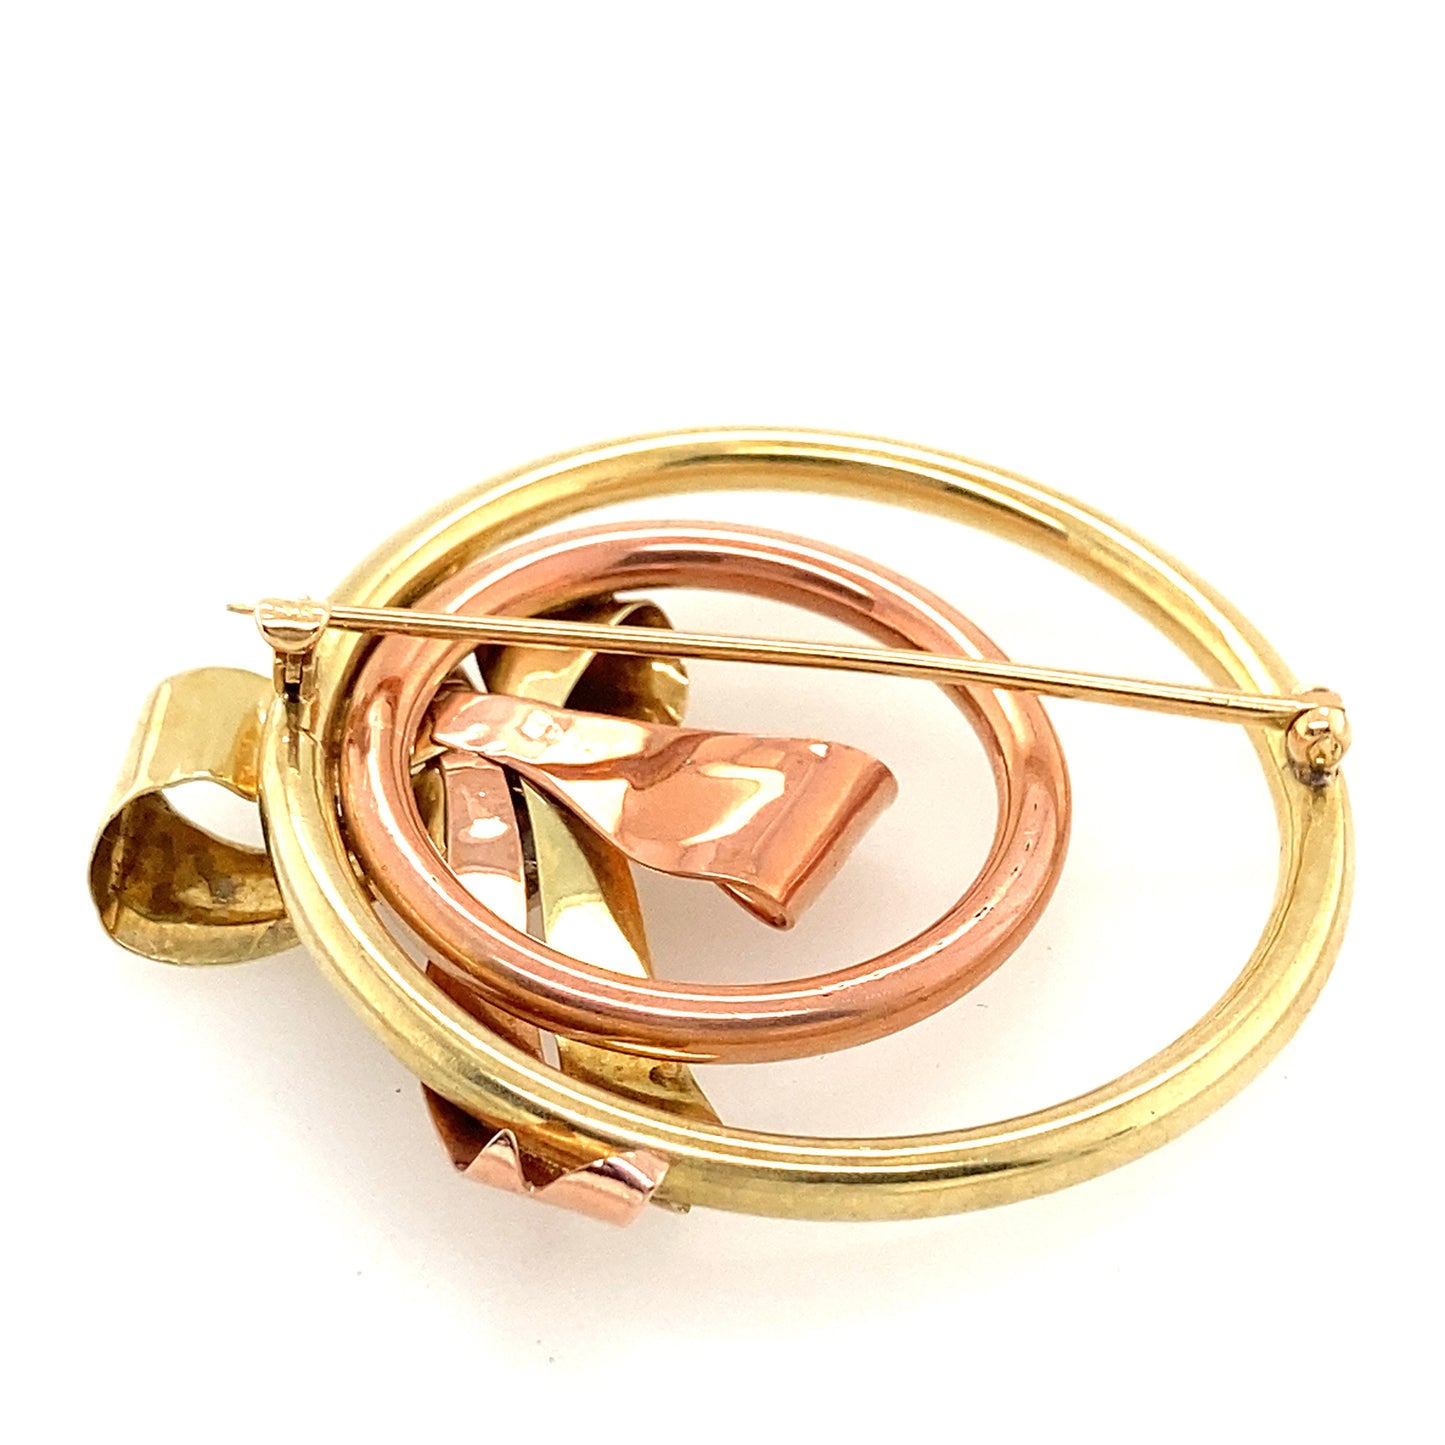 14k yellow and rose gold two color combination  brooch and pendant with sapphire and Diamond stone.